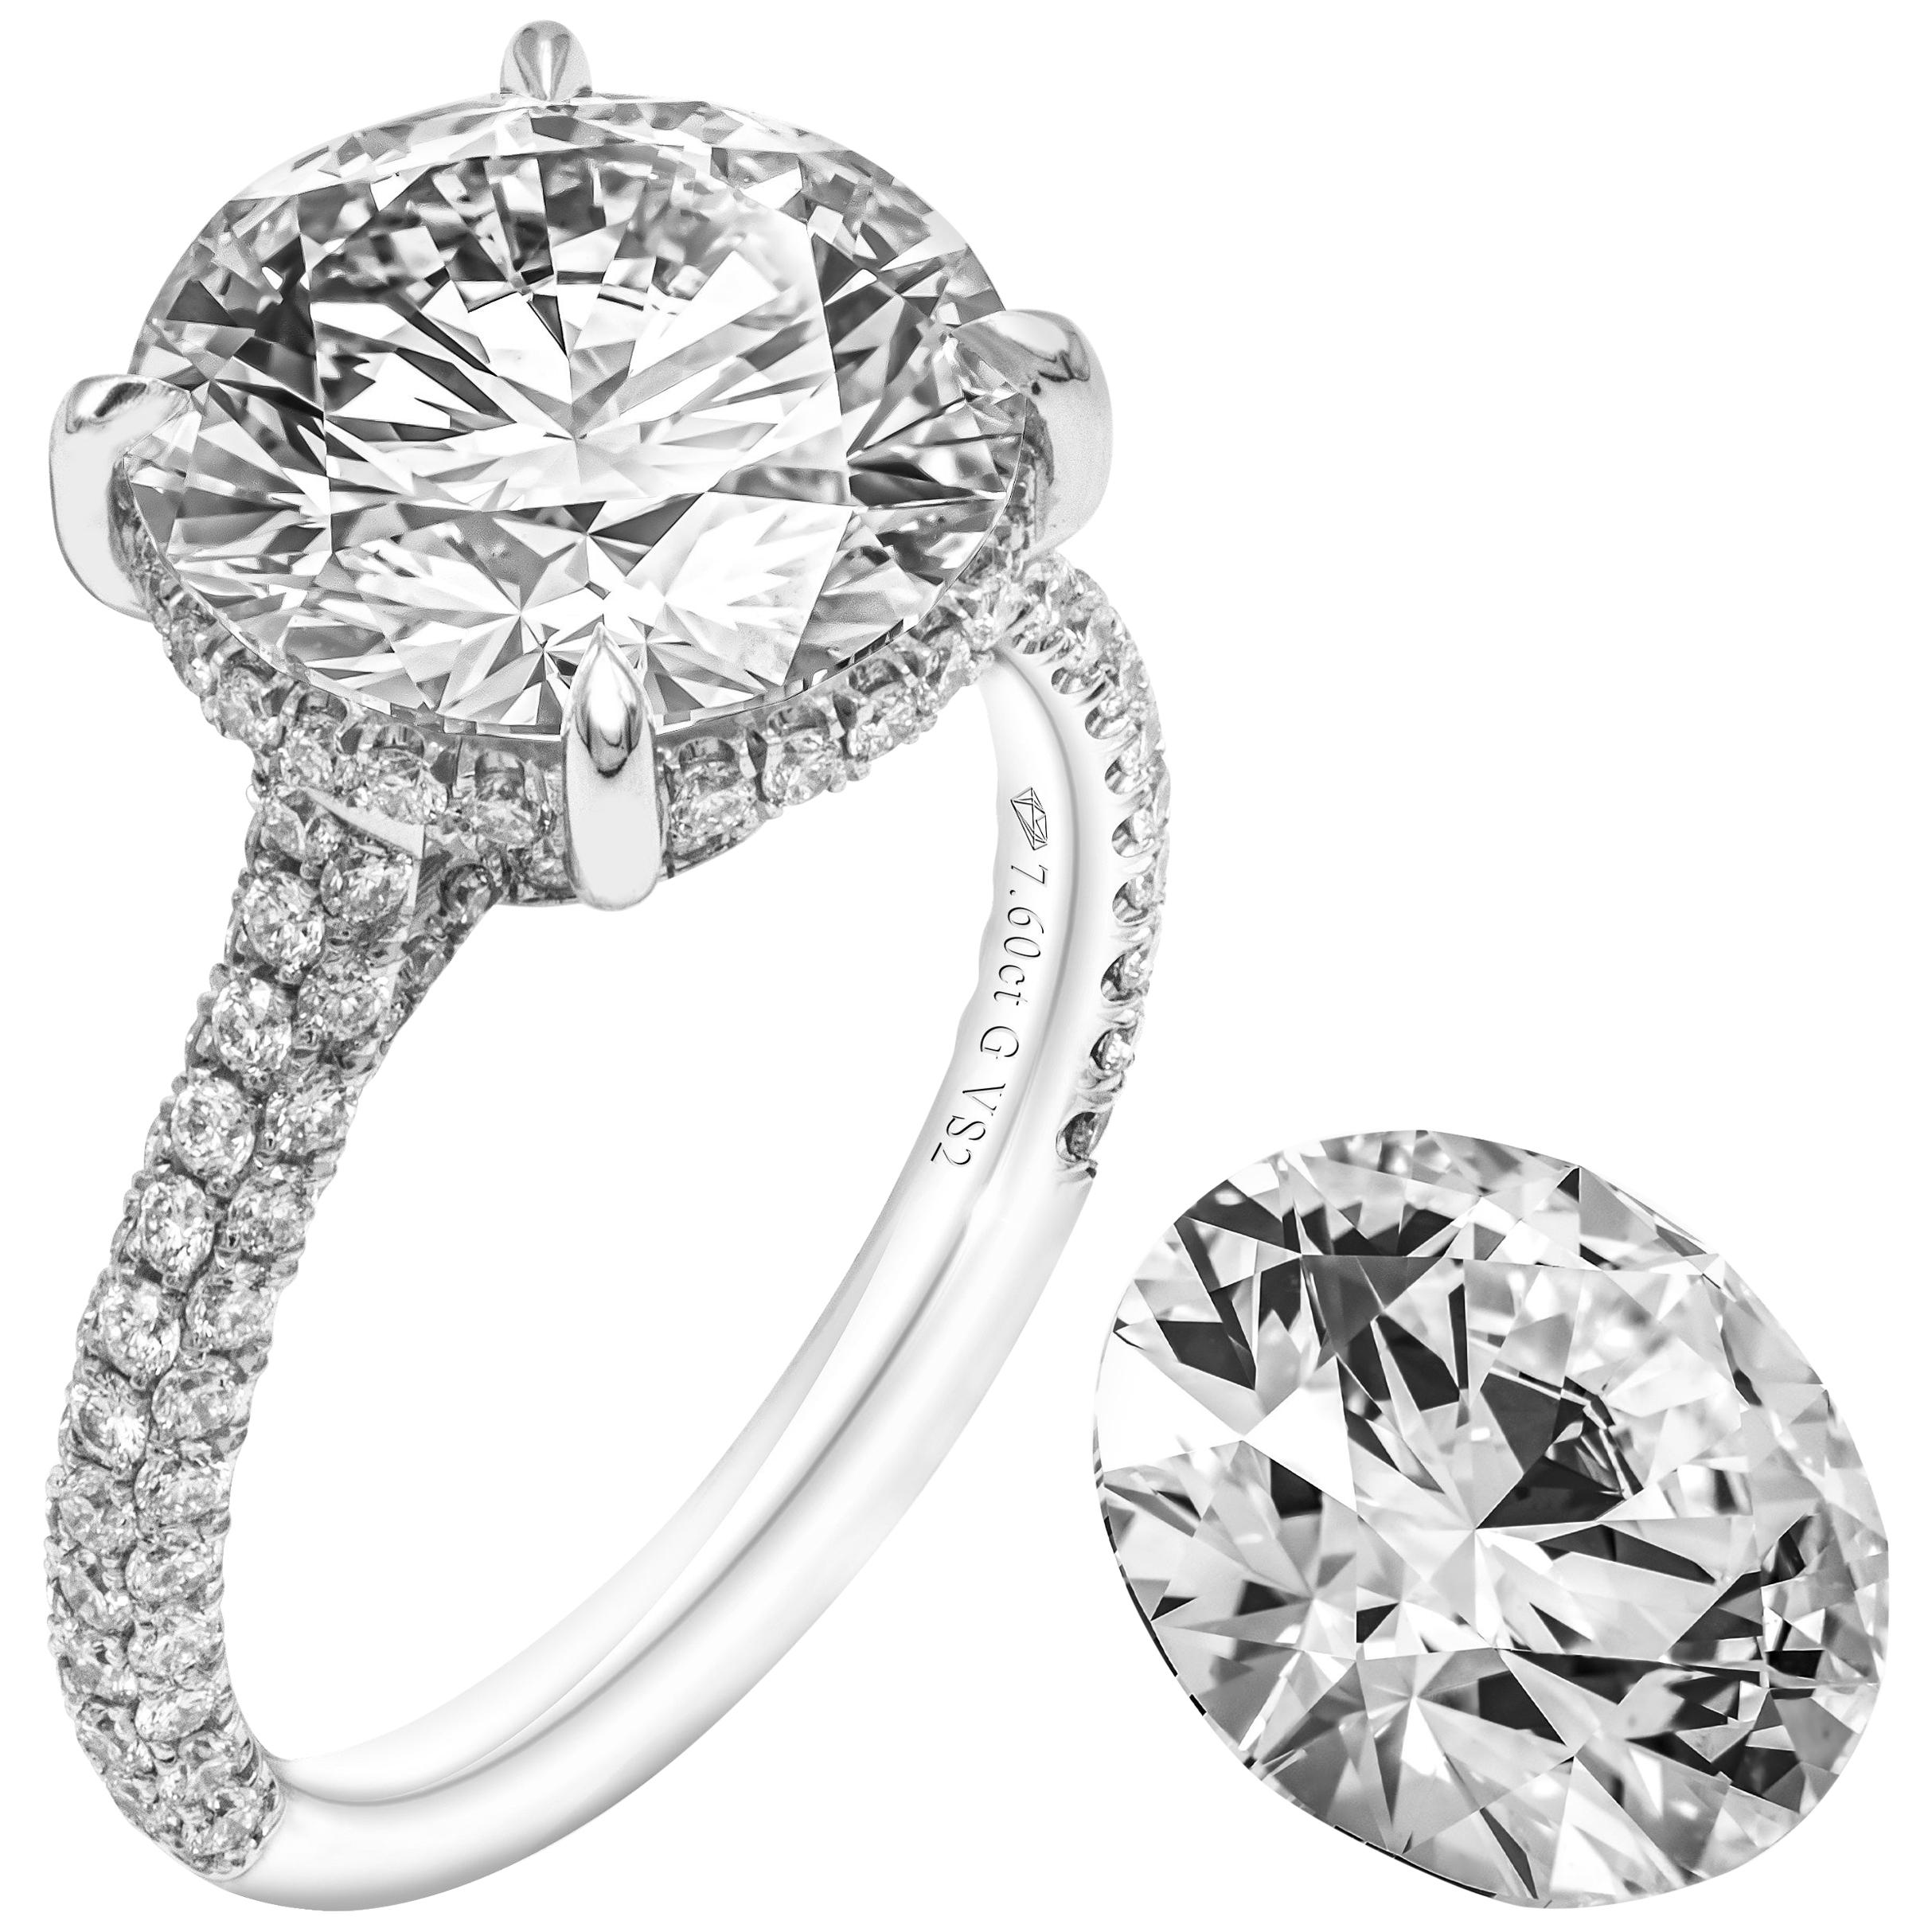 GIA Certified 7.60 Carat Round Diamond Engagement Ring For Sale